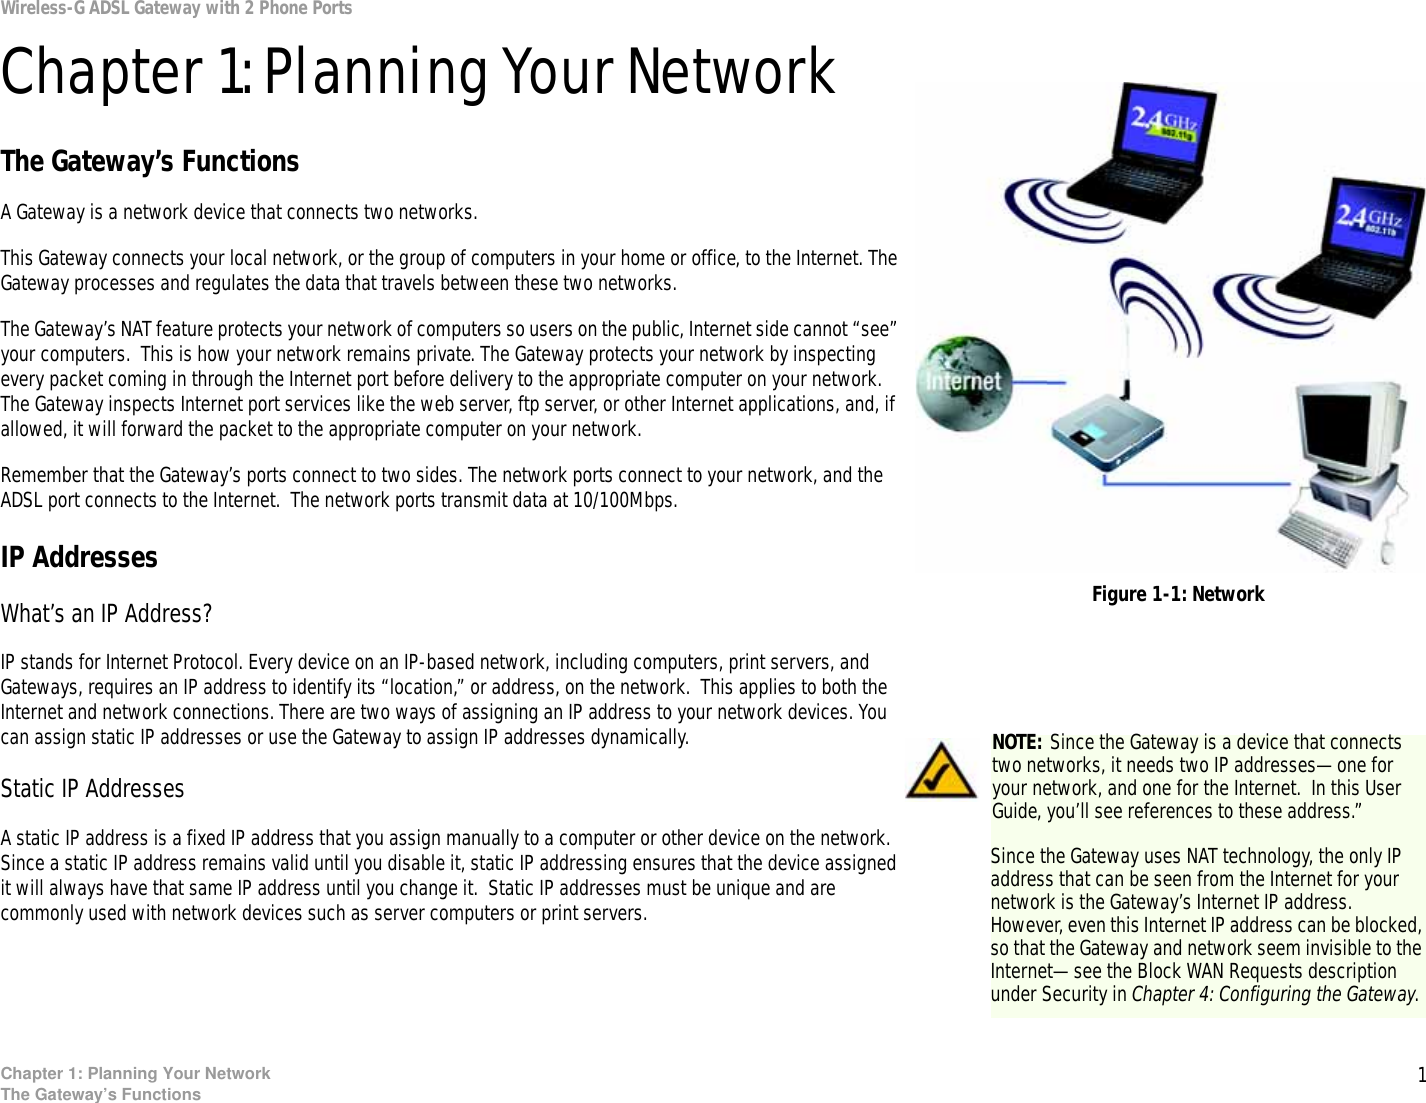 1Chapter 1: Planning Your NetworkThe Gateway’s FunctionsWireless-G ADSL Gateway with 2 Phone PortsChapter 1: Planning Your NetworkThe Gateway’s FunctionsA Gateway is a network device that connects two networks. This Gateway connects your local network, or the group of computers in your home or office, to the Internet. The Gateway processes and regulates the data that travels between these two networks.The Gateway’s NAT feature protects your network of computers so users on the public, Internet side cannot “see” your computers.  This is how your network remains private. The Gateway protects your network by inspecting every packet coming in through the Internet port before delivery to the appropriate computer on your network. The Gateway inspects Internet port services like the web server, ftp server, or other Internet applications, and, if allowed, it will forward the packet to the appropriate computer on your network.Remember that the Gateway’s ports connect to two sides. The network ports connect to your network, and the ADSL port connects to the Internet.  The network ports transmit data at 10/100Mbps.IP AddressesWhat’s an IP Address?IP stands for Internet Protocol. Every device on an IP-based network, including computers, print servers, and Gateways, requires an IP address to identify its “location,” or address, on the network.  This applies to both the Internet and network connections. There are two ways of assigning an IP address to your network devices. You can assign static IP addresses or use the Gateway to assign IP addresses dynamically.Static IP Addresses  A static IP address is a fixed IP address that you assign manually to a computer or other device on the network.  Since a static IP address remains valid until you disable it, static IP addressing ensures that the device assigned it will always have that same IP address until you change it.  Static IP addresses must be unique and are commonly used with network devices such as server computers or print servers. NOTE: Since the Gateway is a device that connects two networks, it needs two IP addresses—one for your network, and one for the Internet.  In this User Guide, you’ll see references to these address.”Since the Gateway uses NAT technology, the only IP address that can be seen from the Internet for your network is the Gateway’s Internet IP address. However, even this Internet IP address can be blocked, so that the Gateway and network seem invisible to the Internet—see the Block WAN Requests description under Security in Chapter 4: Configuring the Gateway.Figure 1-1: Network